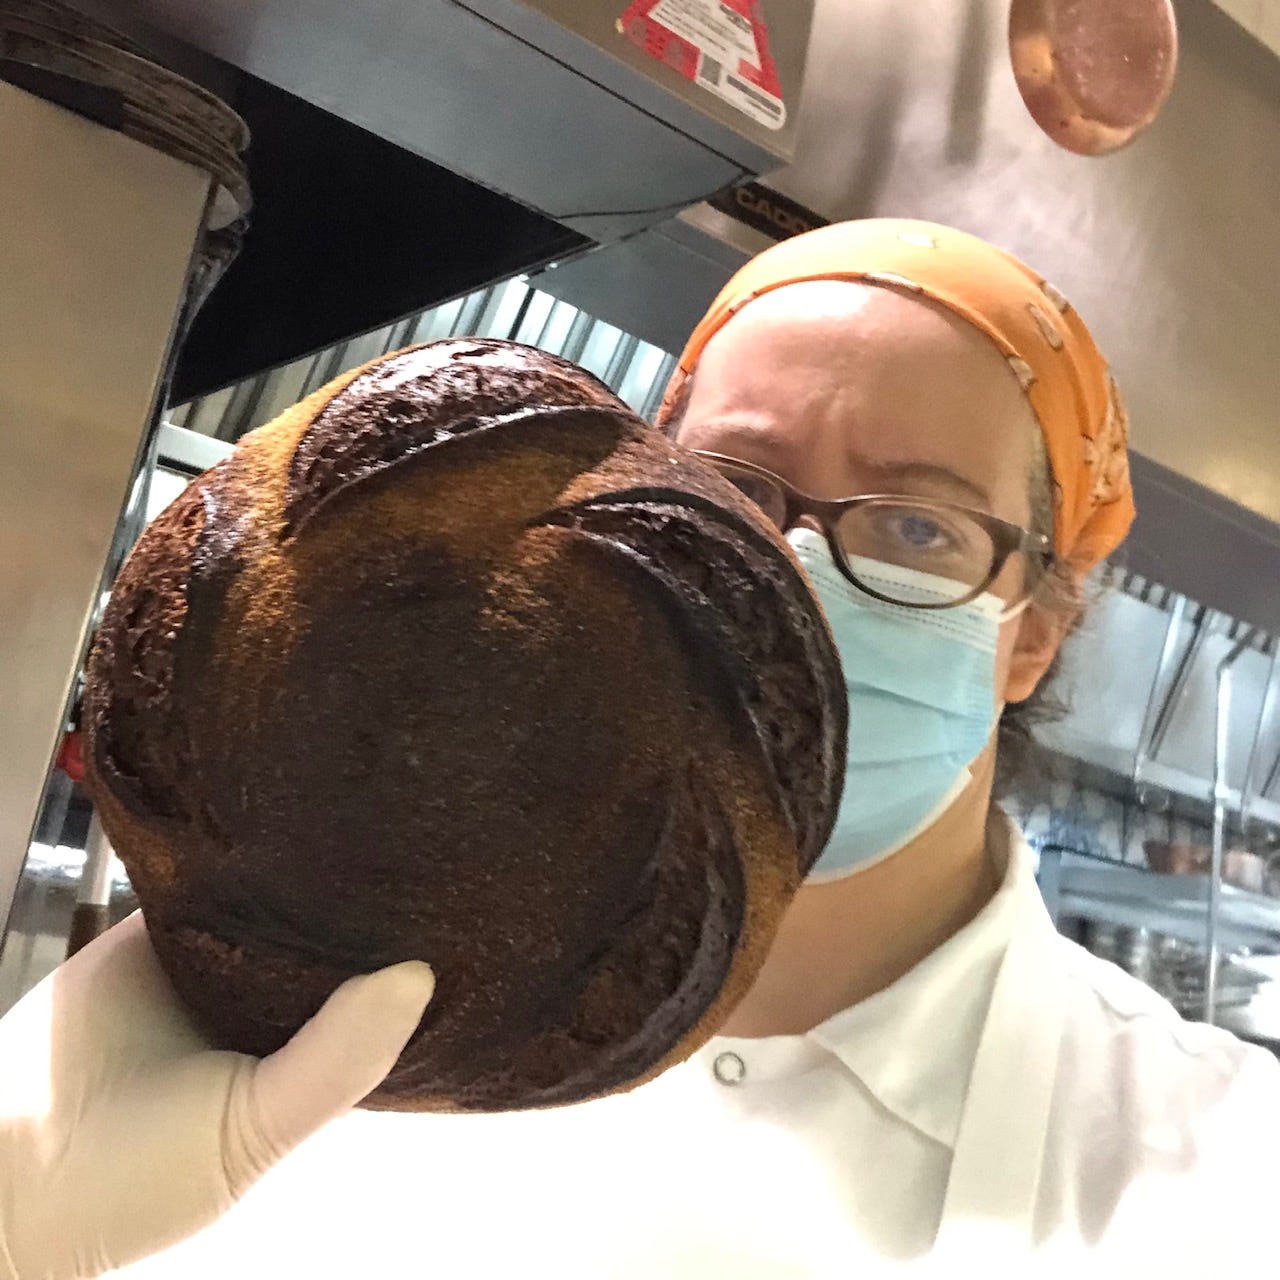 Me, wearing a medical mask, holding up a burned round loaf, and I look very upset with myself.